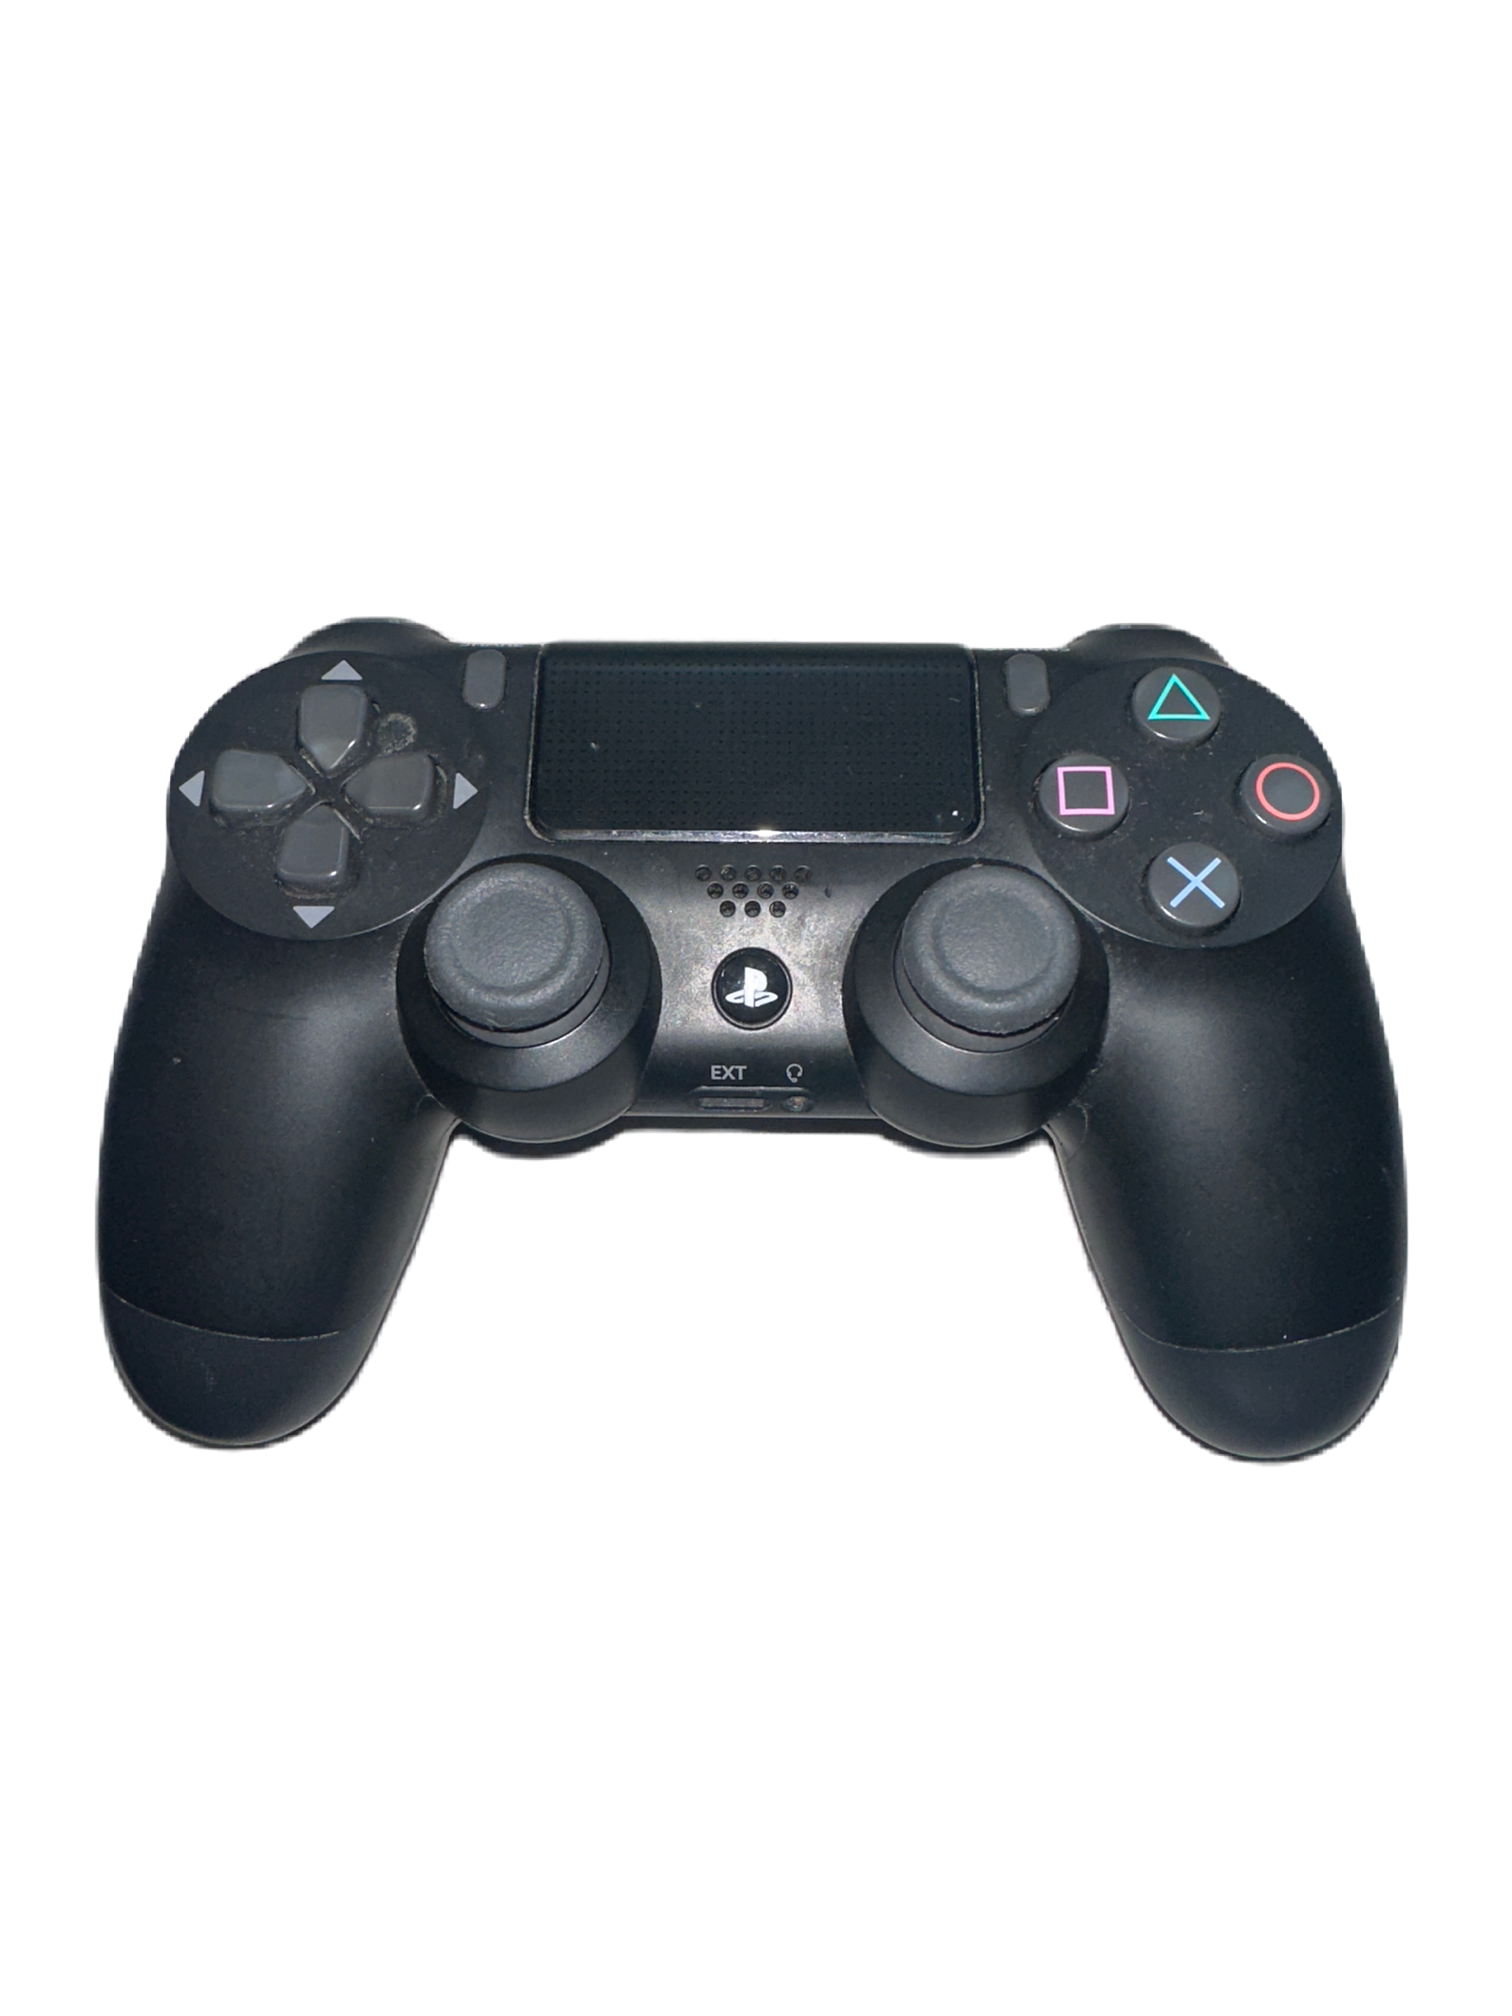 Ps4 Controller Black - Unboxed, B